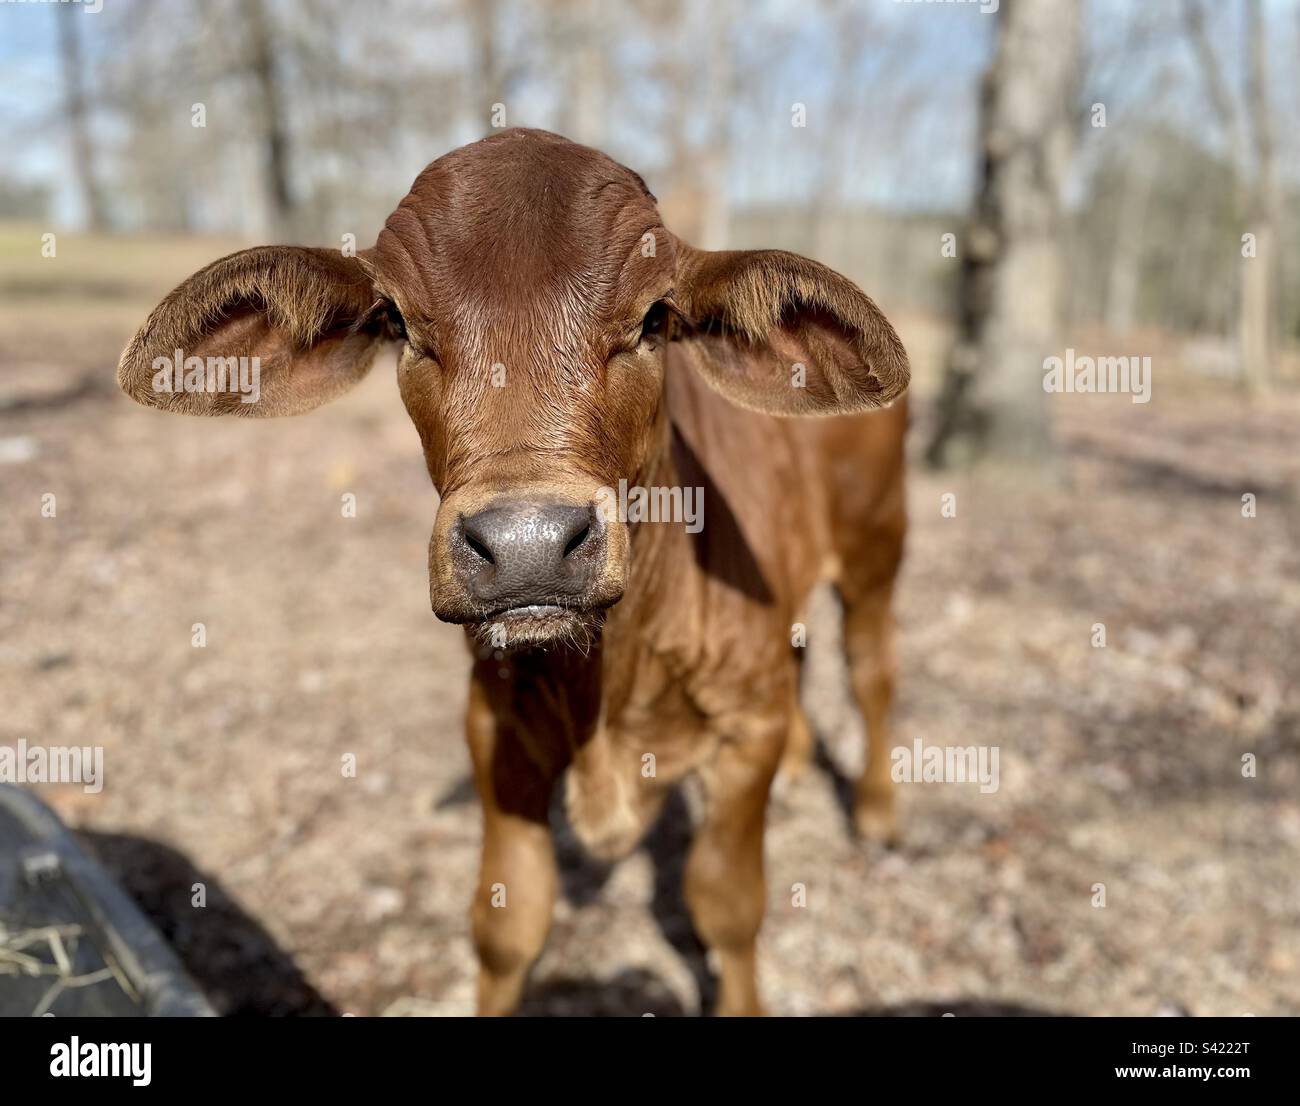 Newest calf at the water trough. This was our first time to meet. He was just as curious as I. Stock Photo